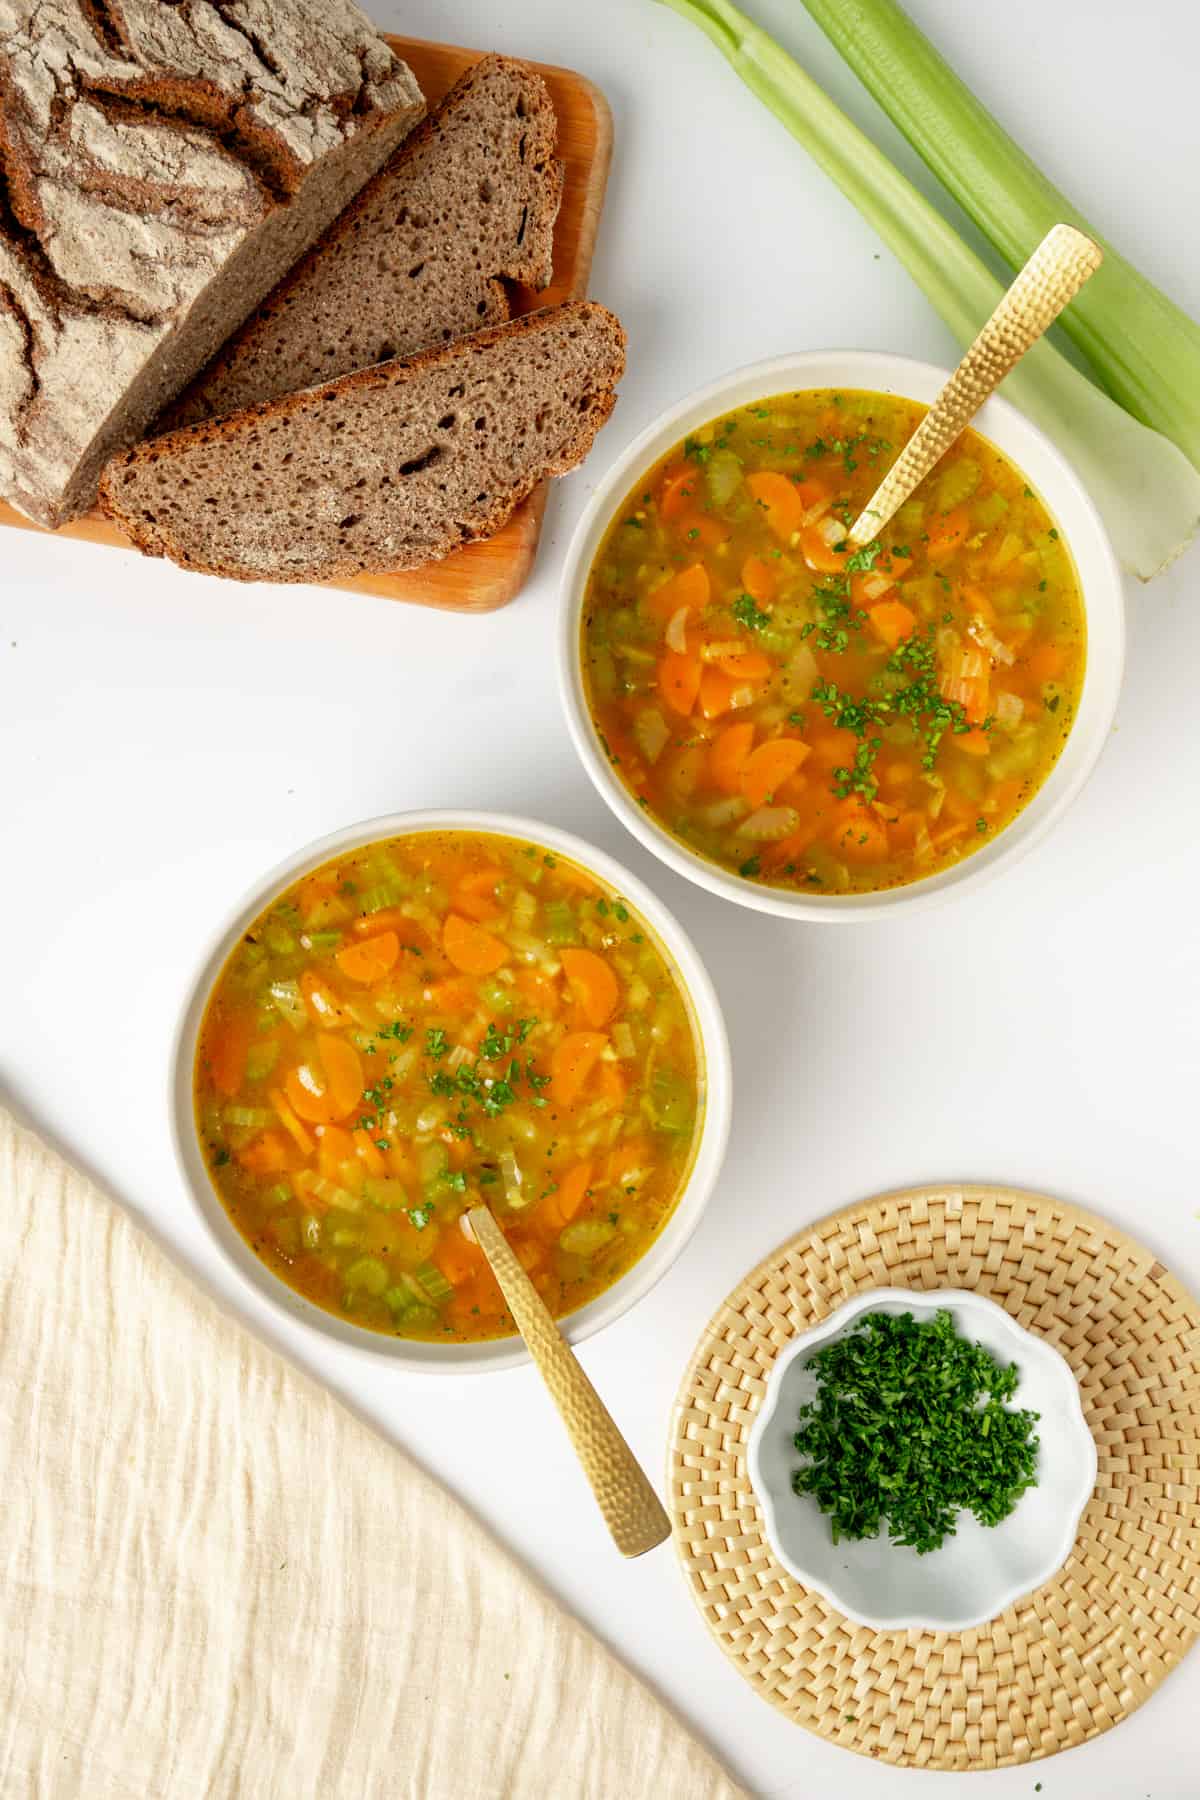 Two bowls of carrot and celery soup served with bread and chopped parsley.